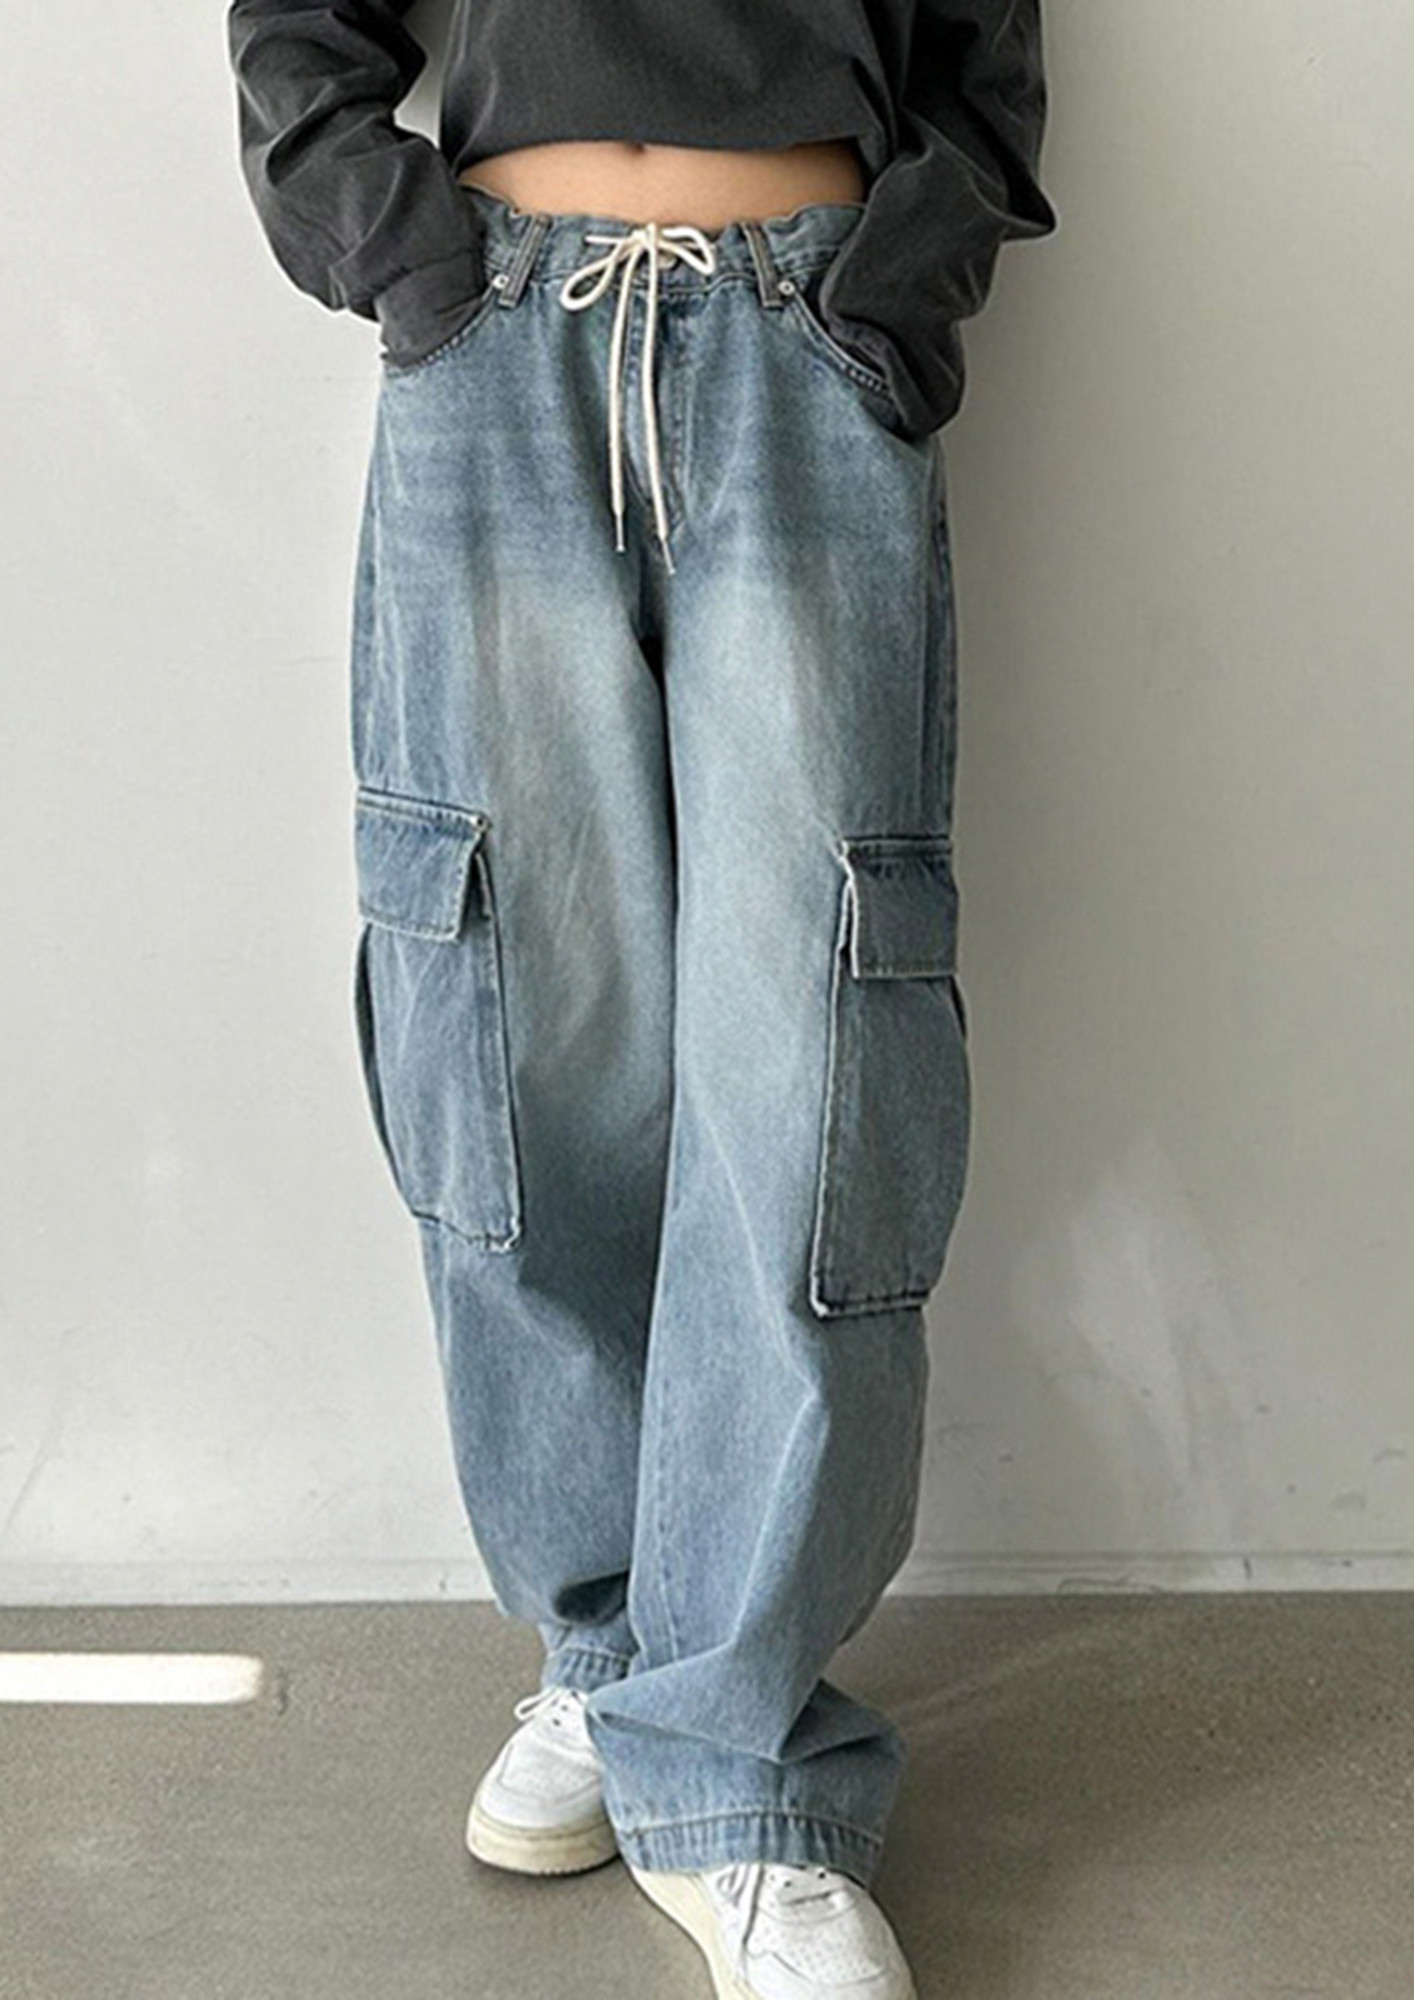 Buy Stylish Black Baggy Cargo Pants Mens at Great Price Online